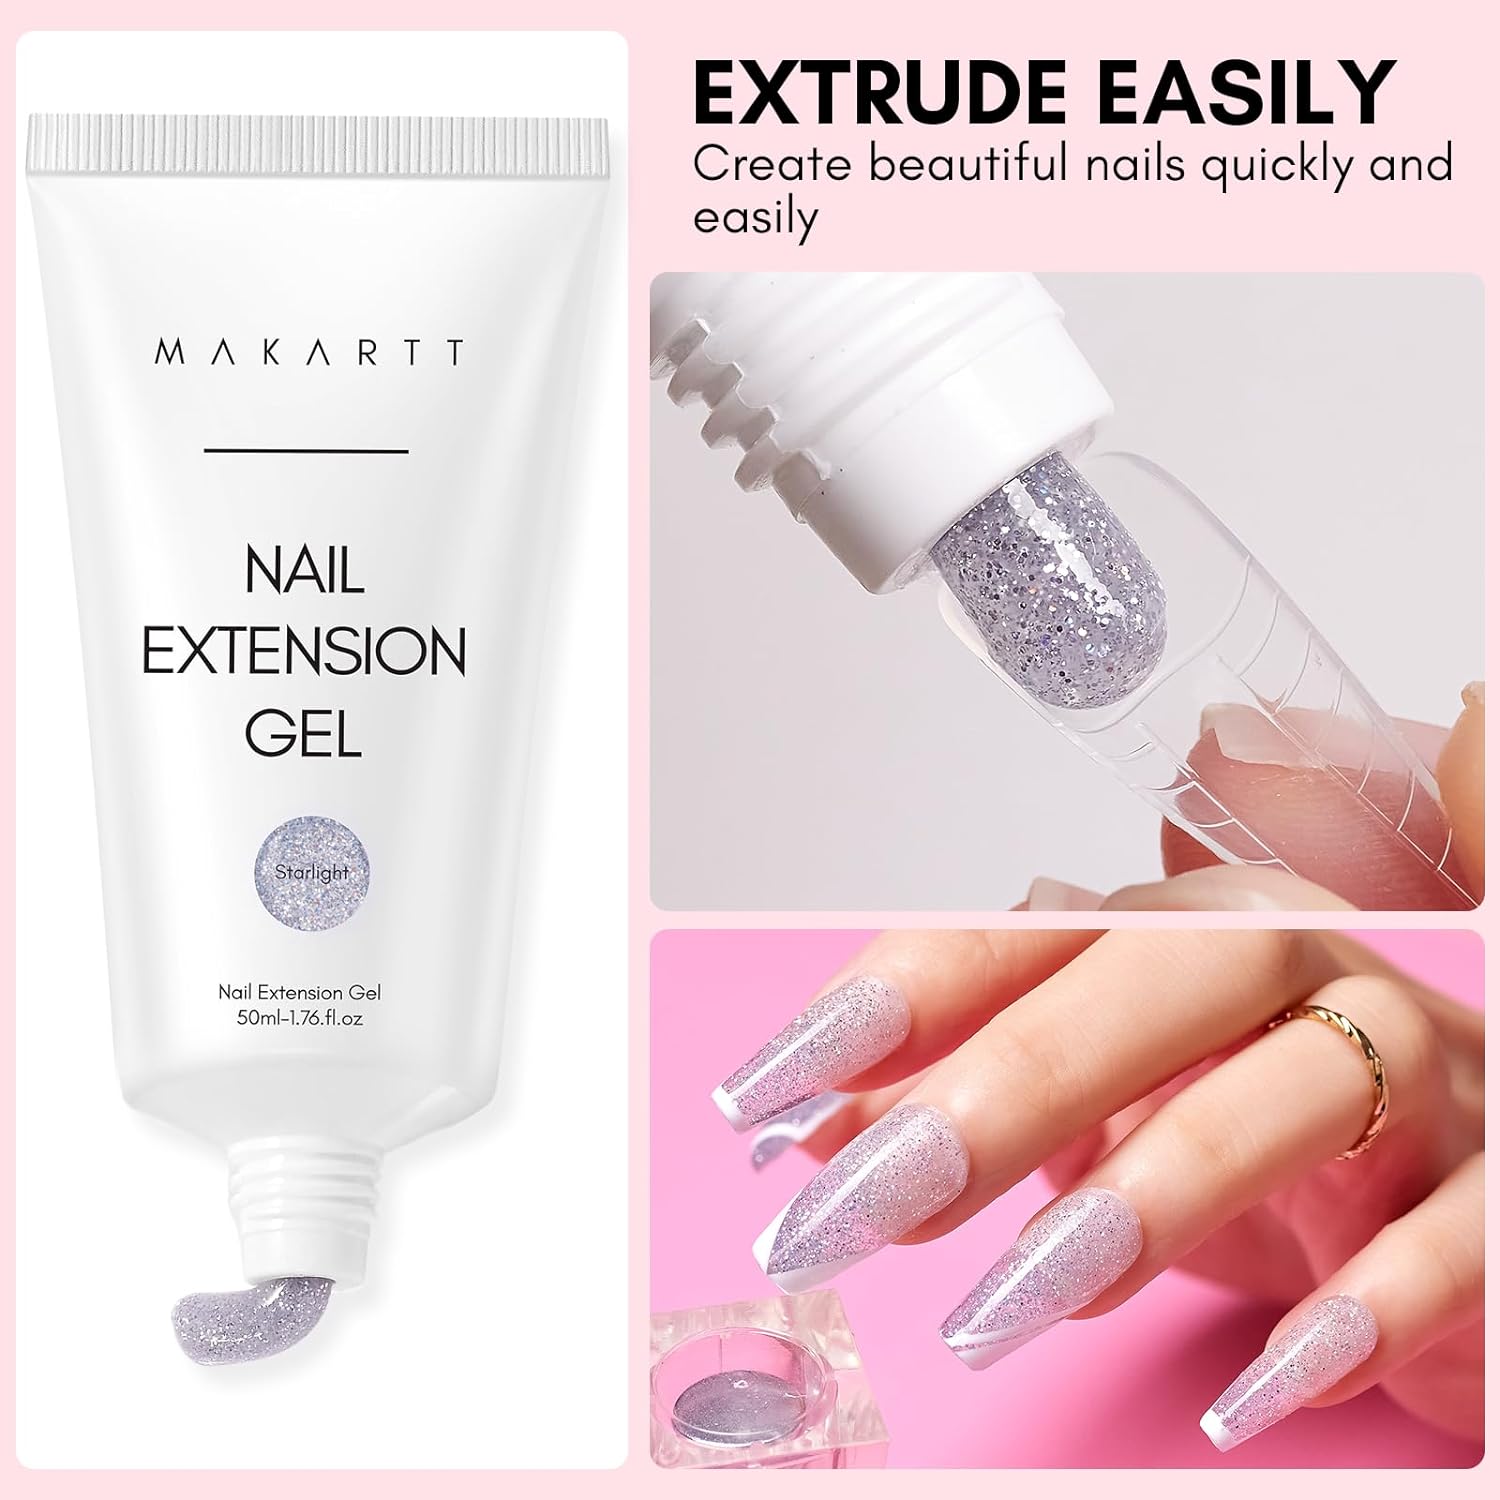 Top Beauty Parlours For Nail Extension in Hoshiarpur - Best Beauty Parlors  For Acrylic Nail Extension - Justdial